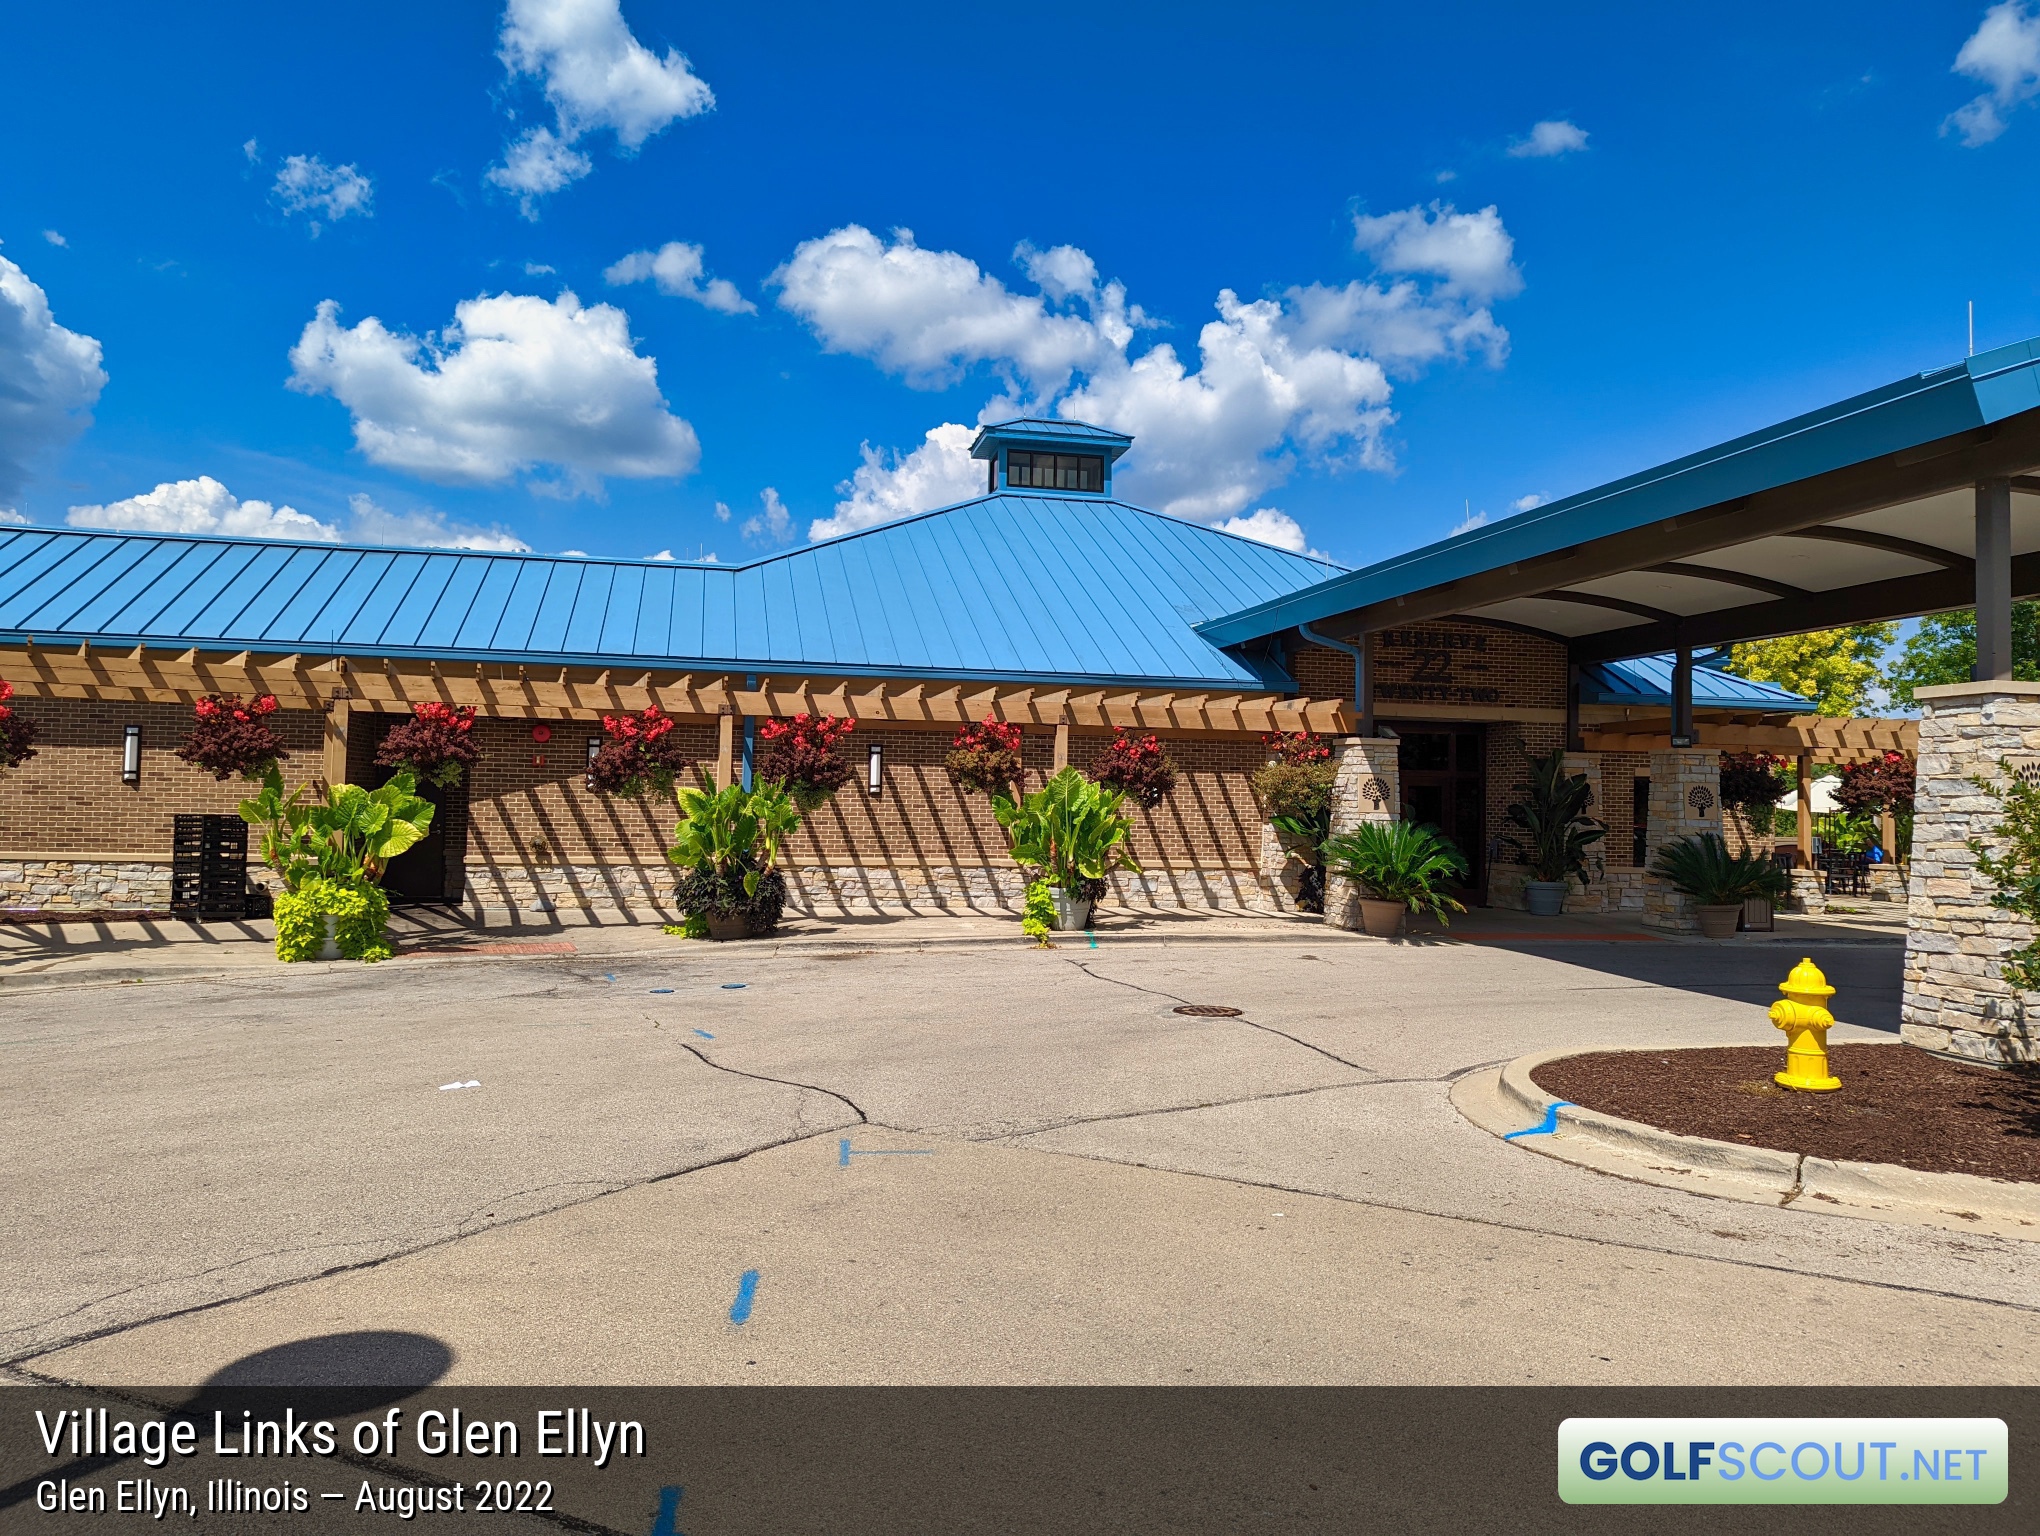 Photo of the clubhouse at Village Links of Glen Ellyn - 9 Hole Course in Glen Ellyn, Illinois. 